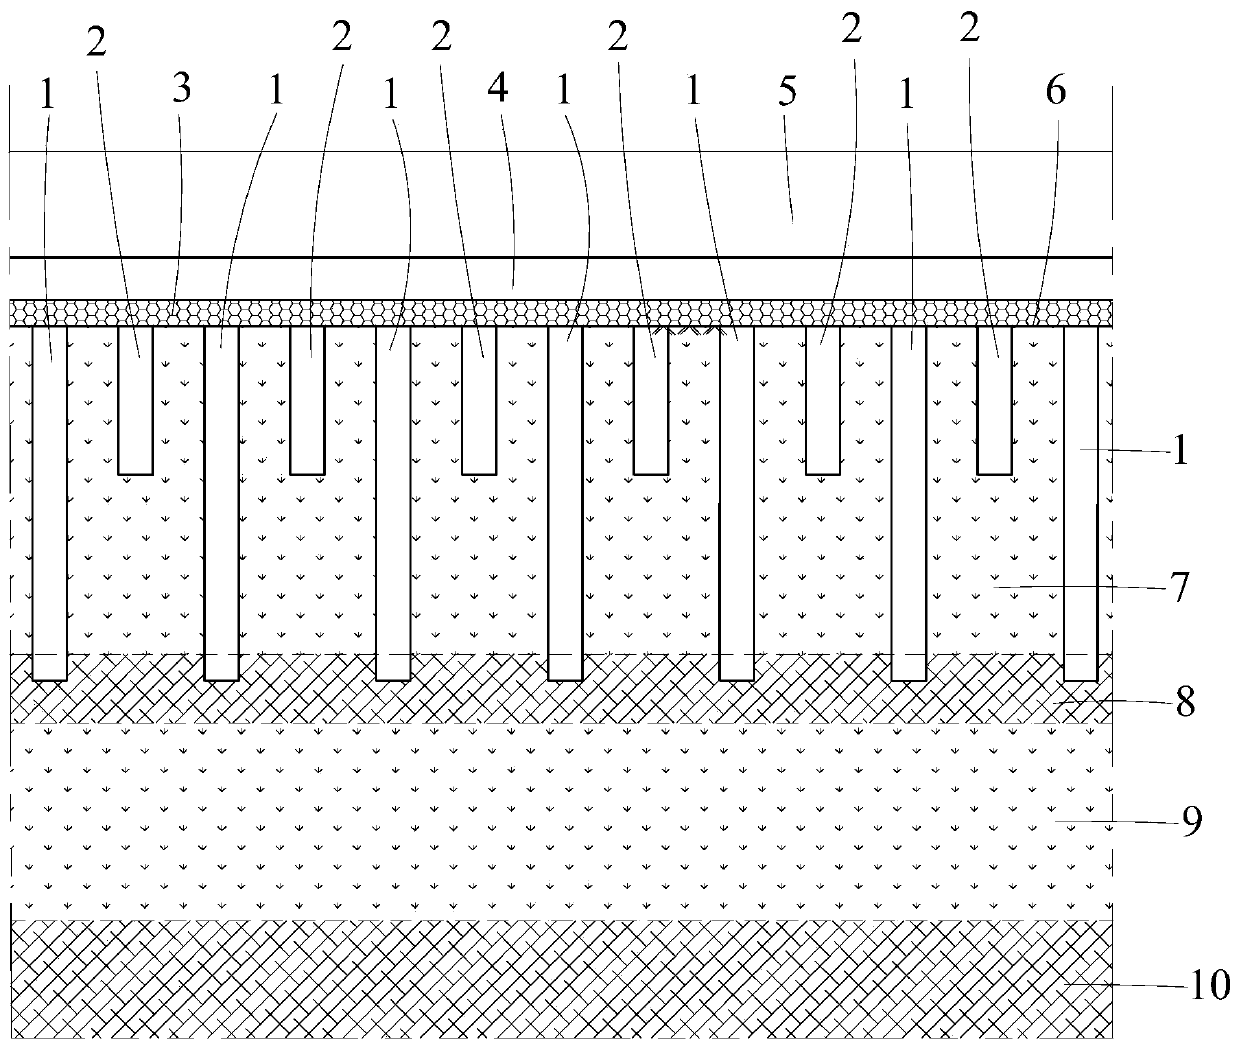 Foundation treatment structure suitable for deep soft foundation with sandwiched thin bearing stratum and construction method